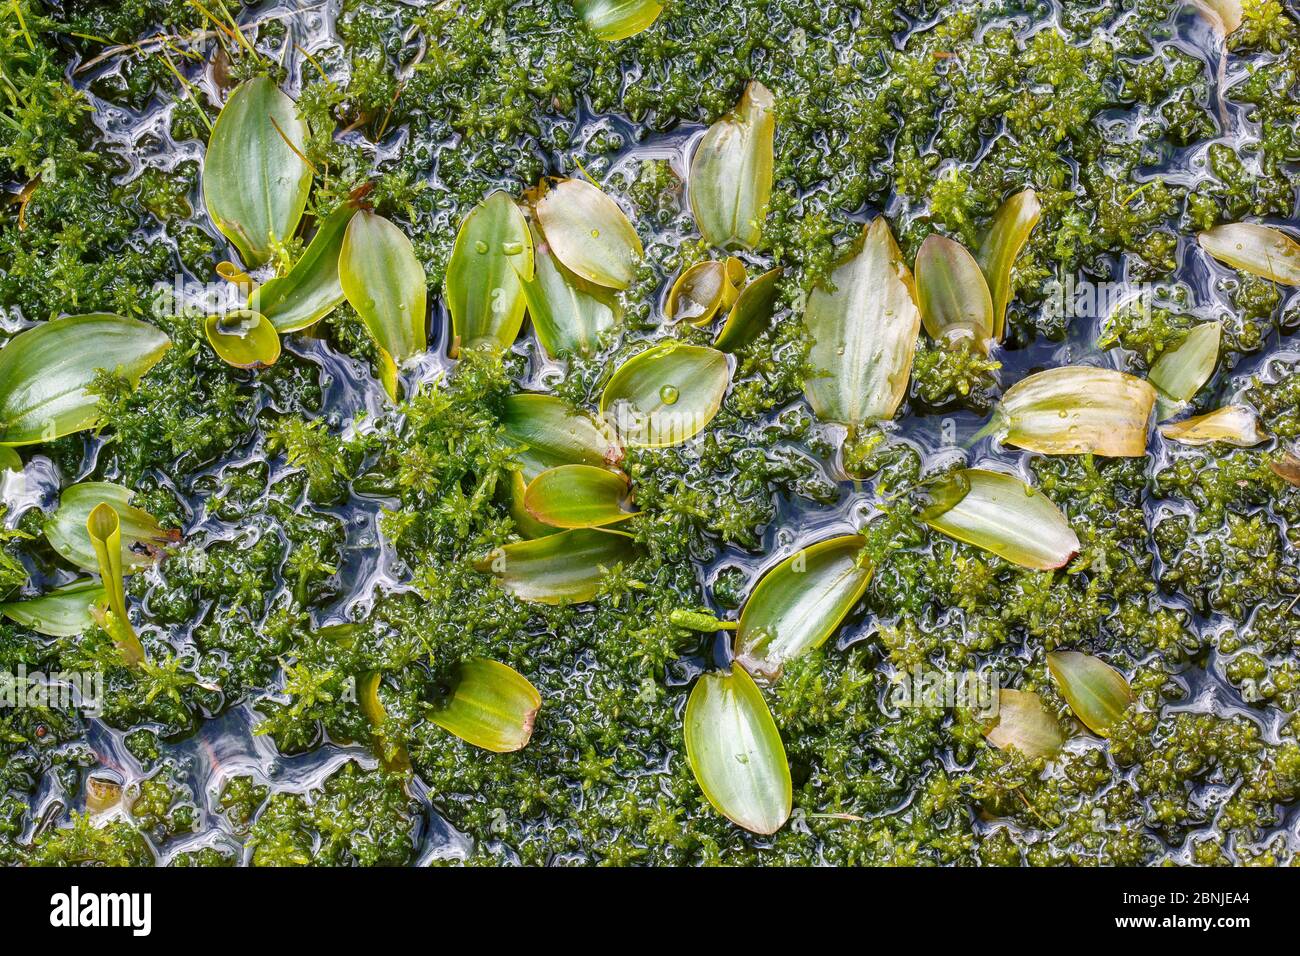 Broad-leaved pondweed (Potamogeton natans) growing among Sphagnum moss in a small pond in Woorgreens Nature Reserve, Gloucestershire, UK Stock Photo